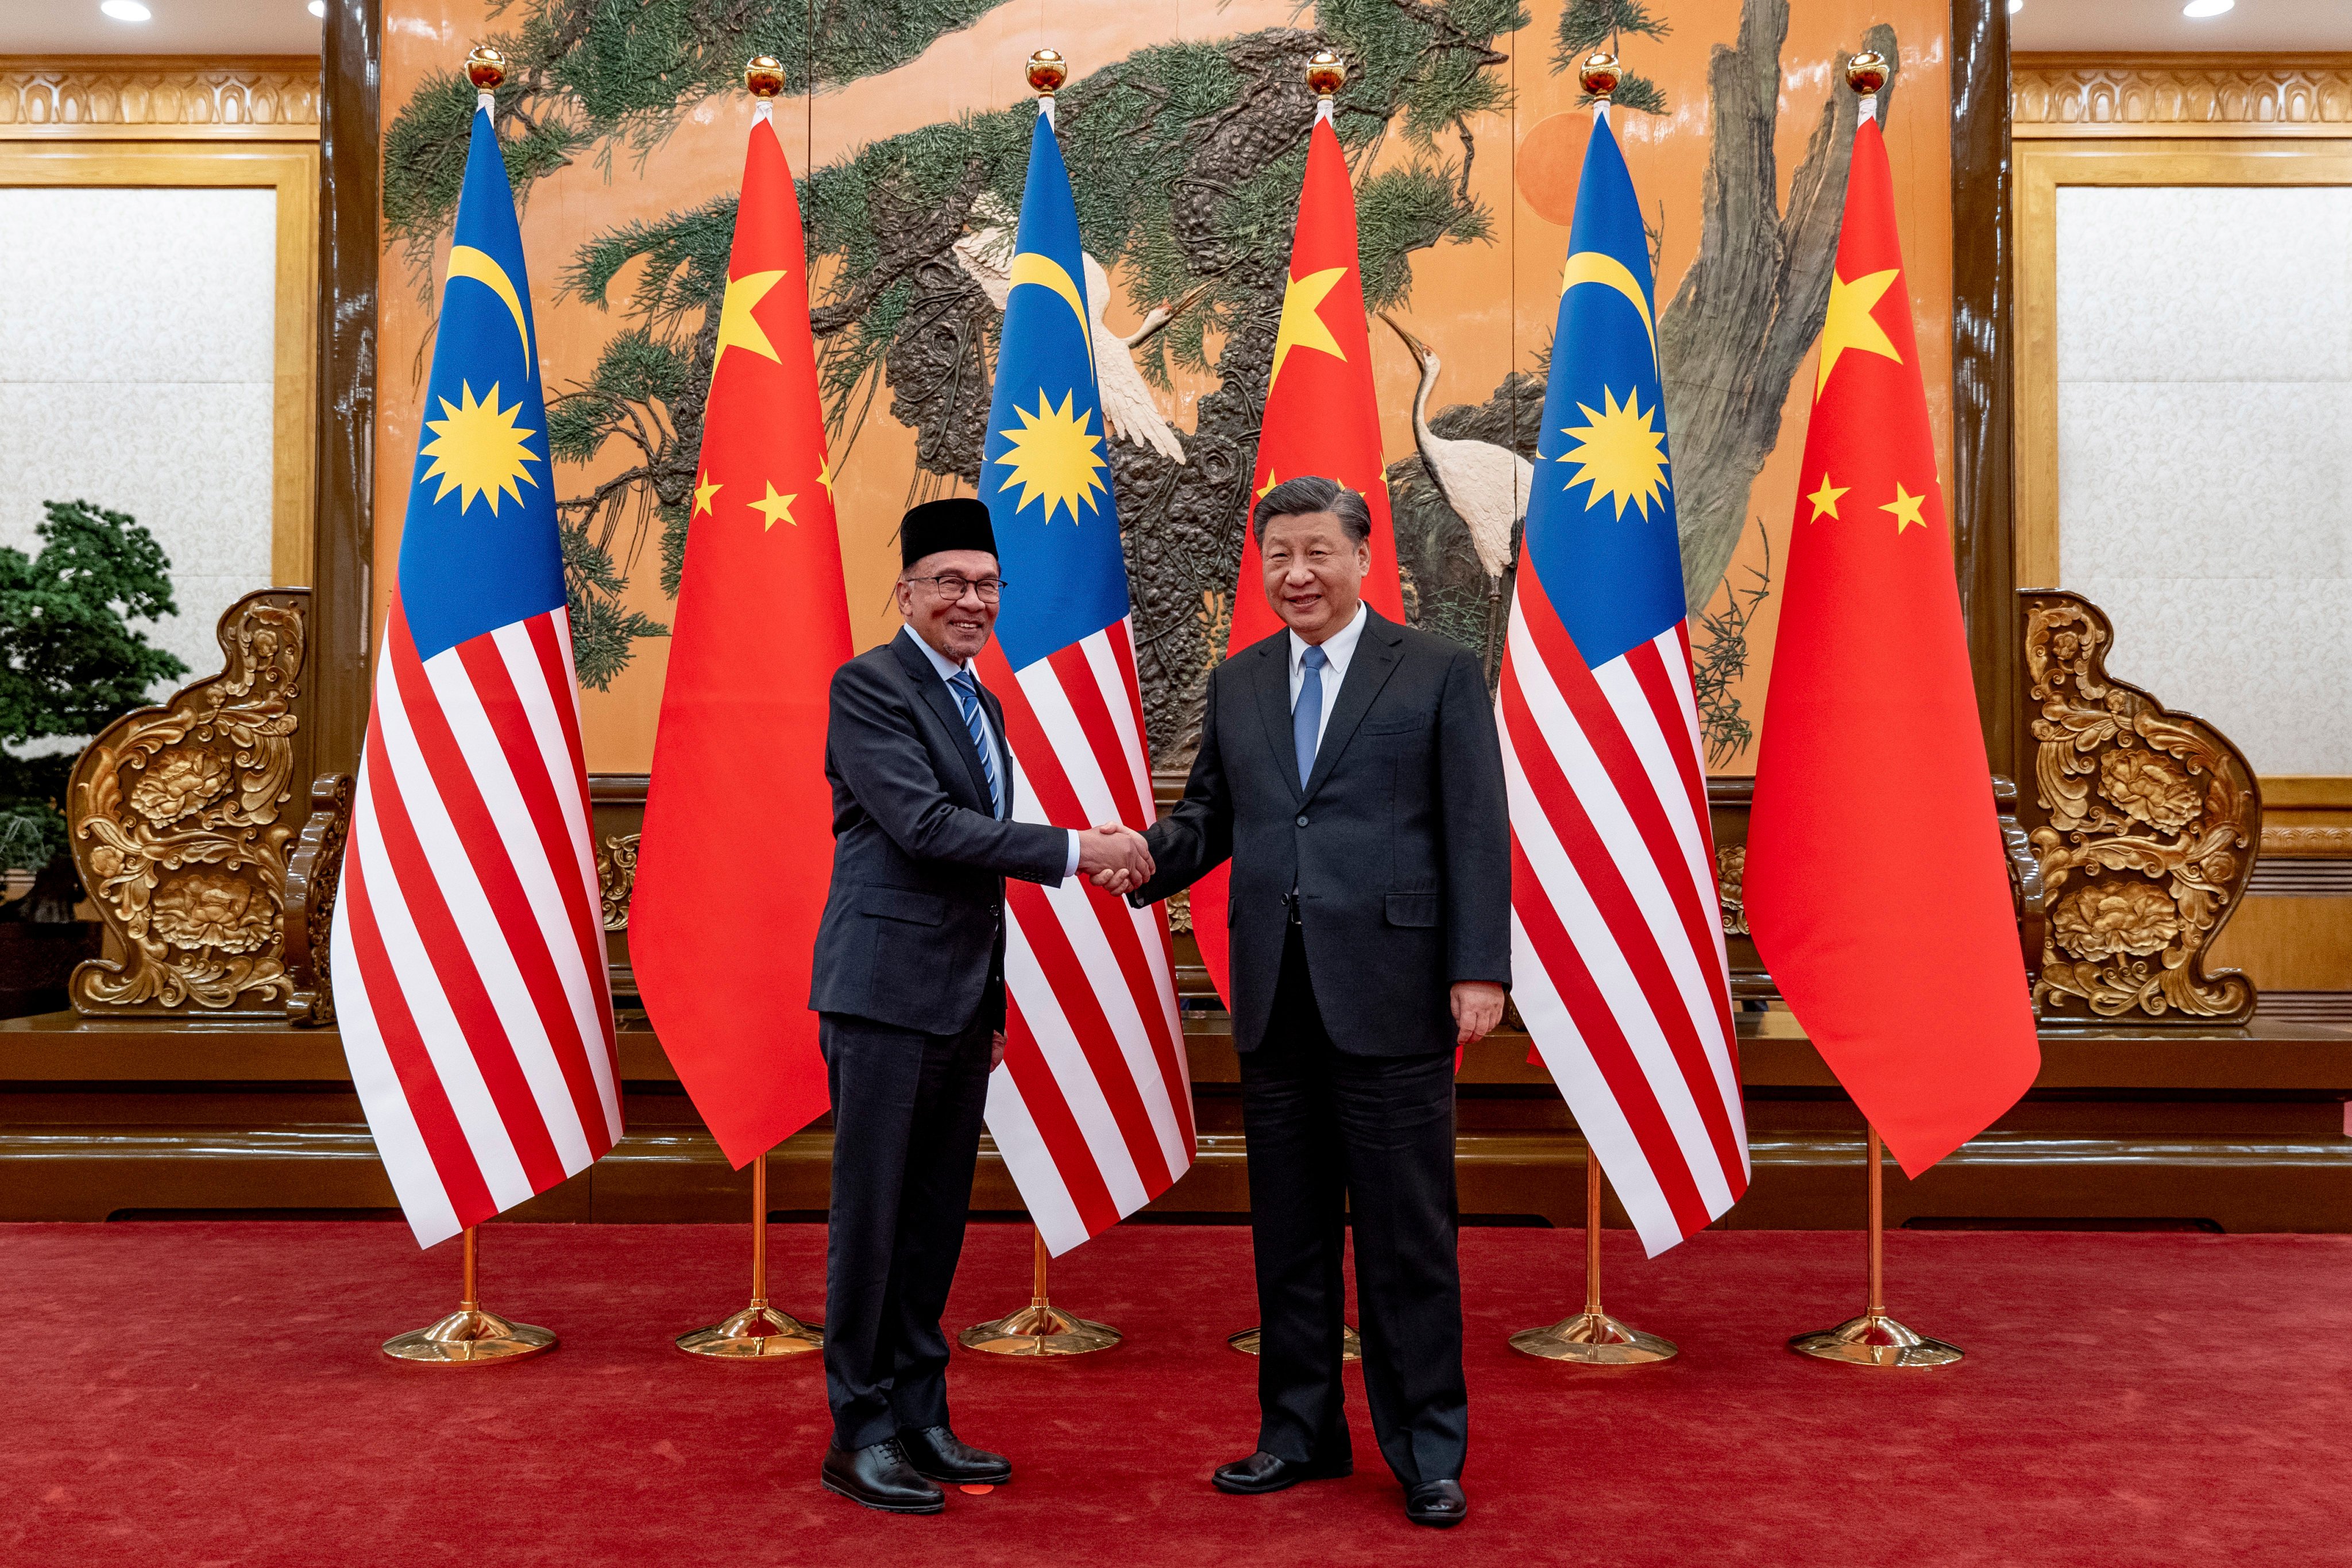 Malaysian Prime Minister Anwar Ibrahim meeting Chinese President Xi Jinping in Beijing on March 31. Photo: Prime Minister’s Office of Malaysia